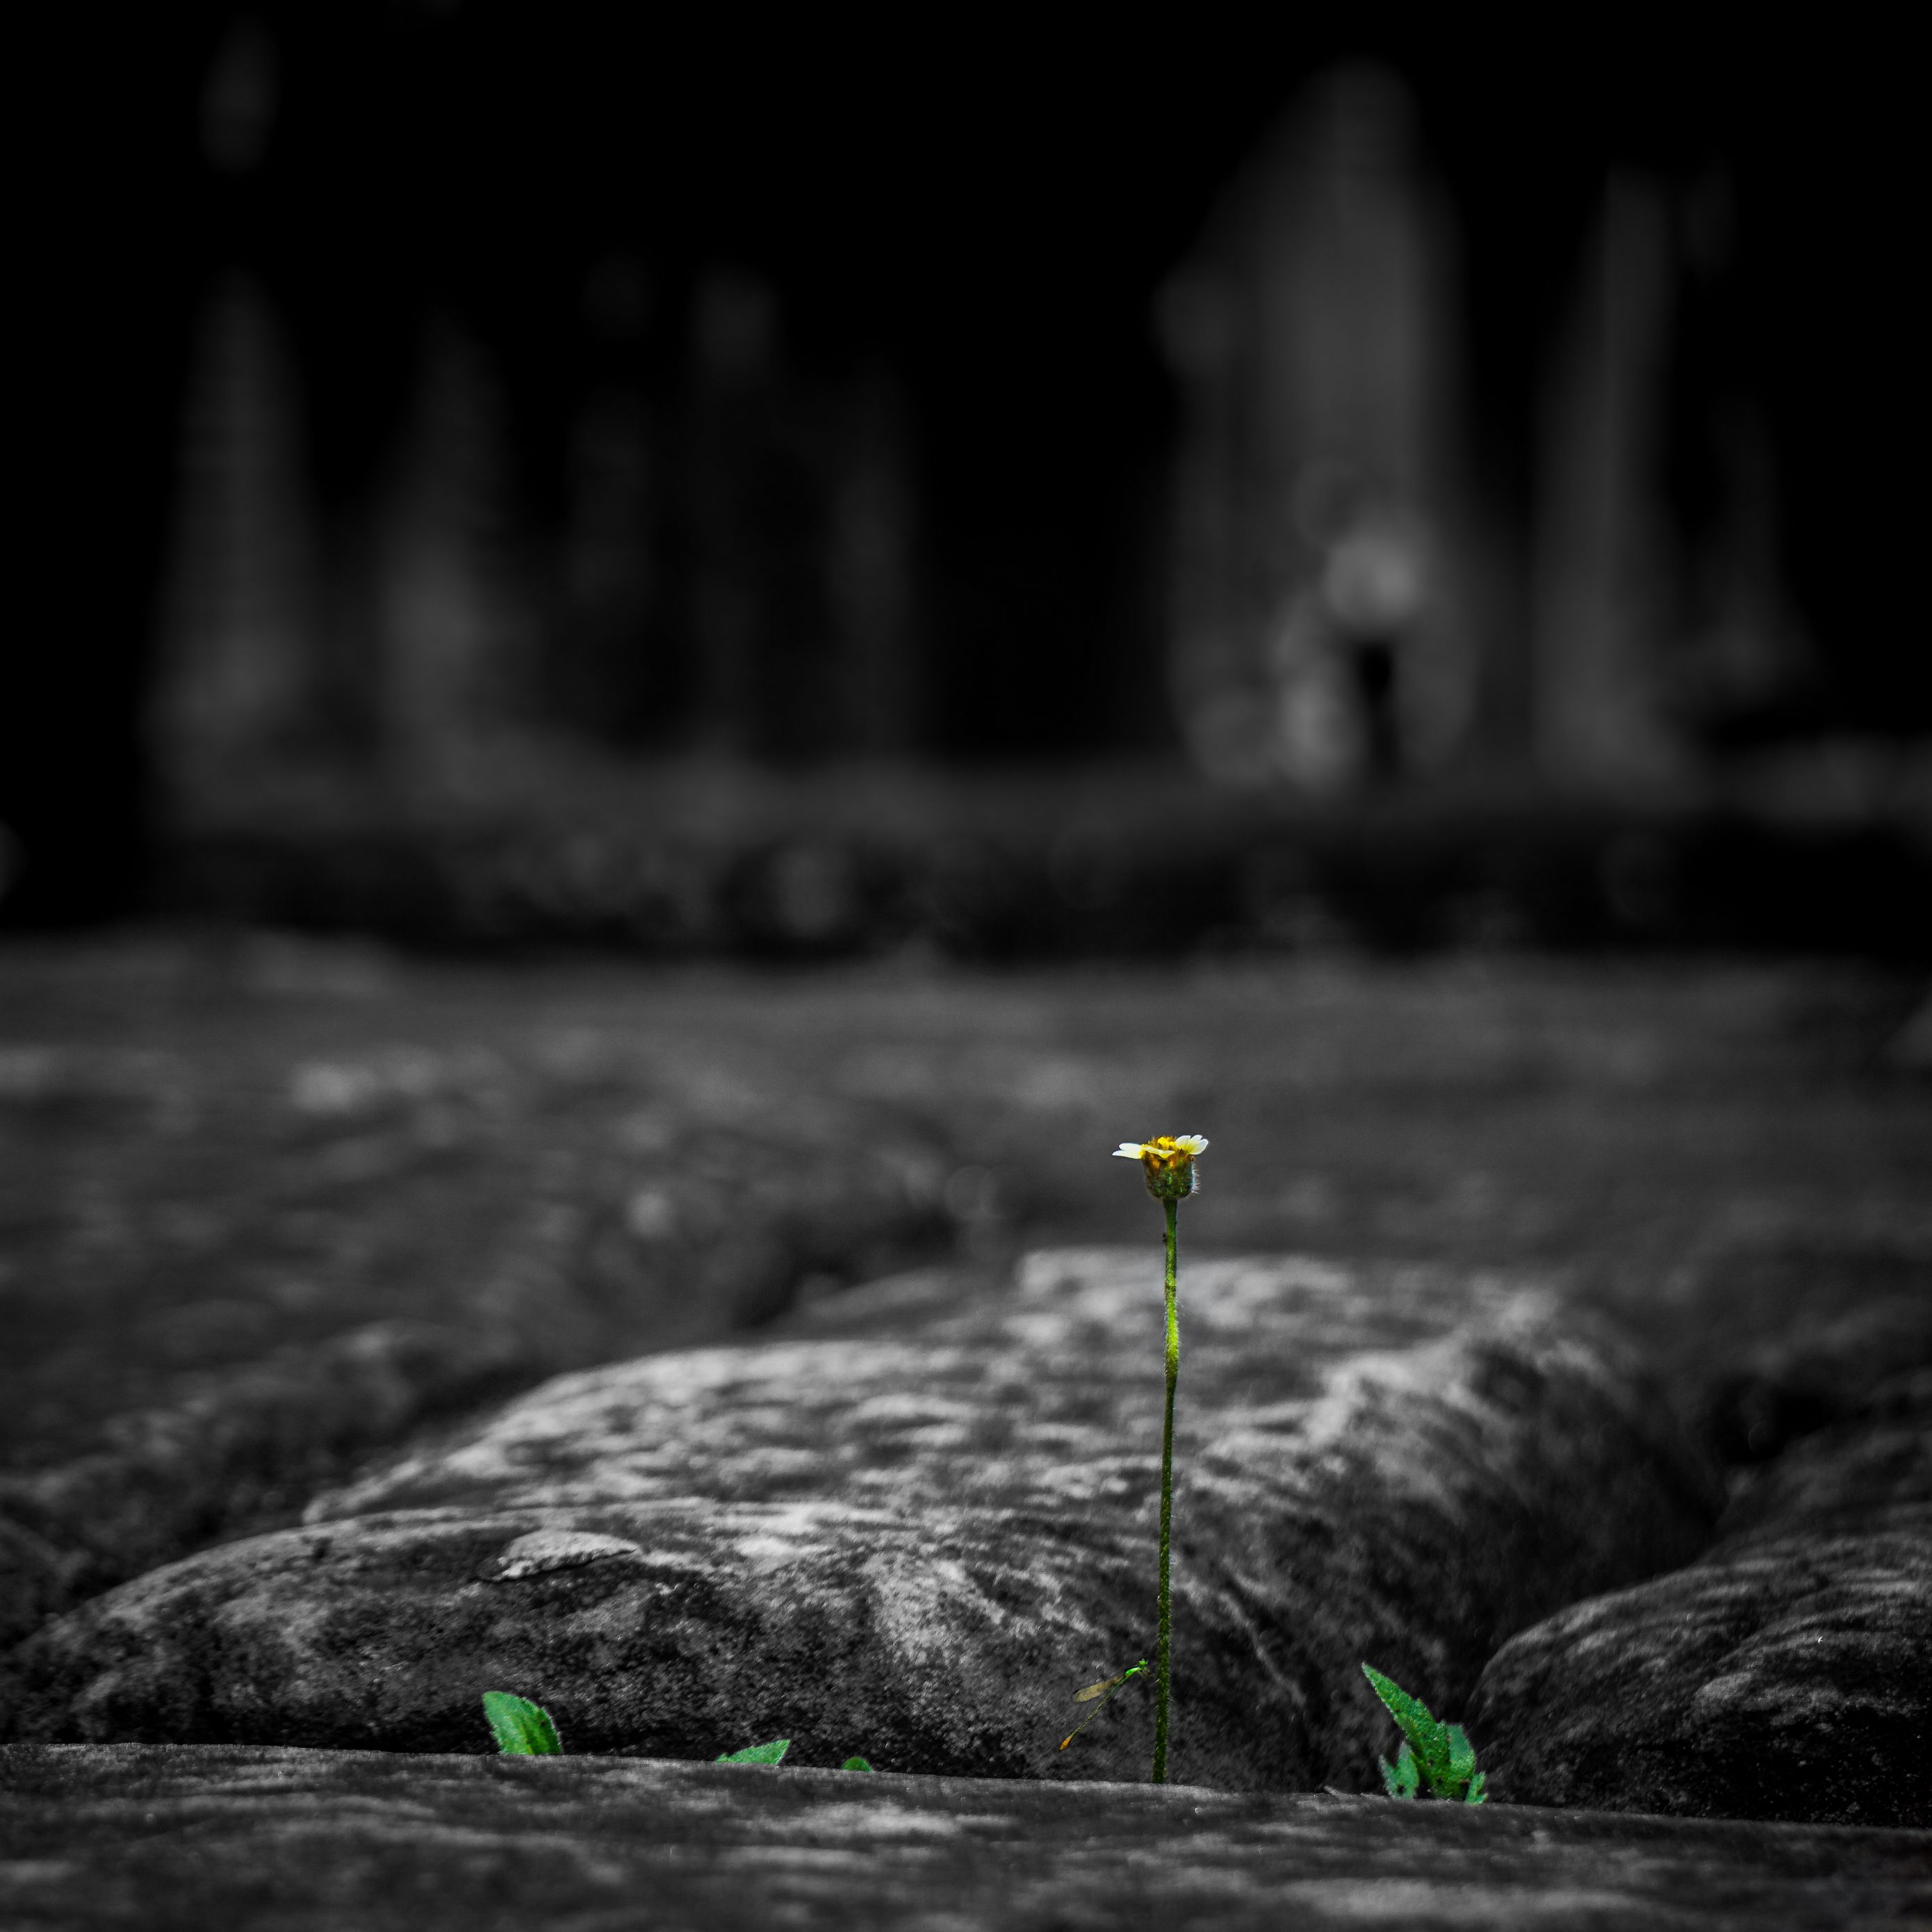 Download wallpaper 2780x2780 stone, flower, power of nature ...